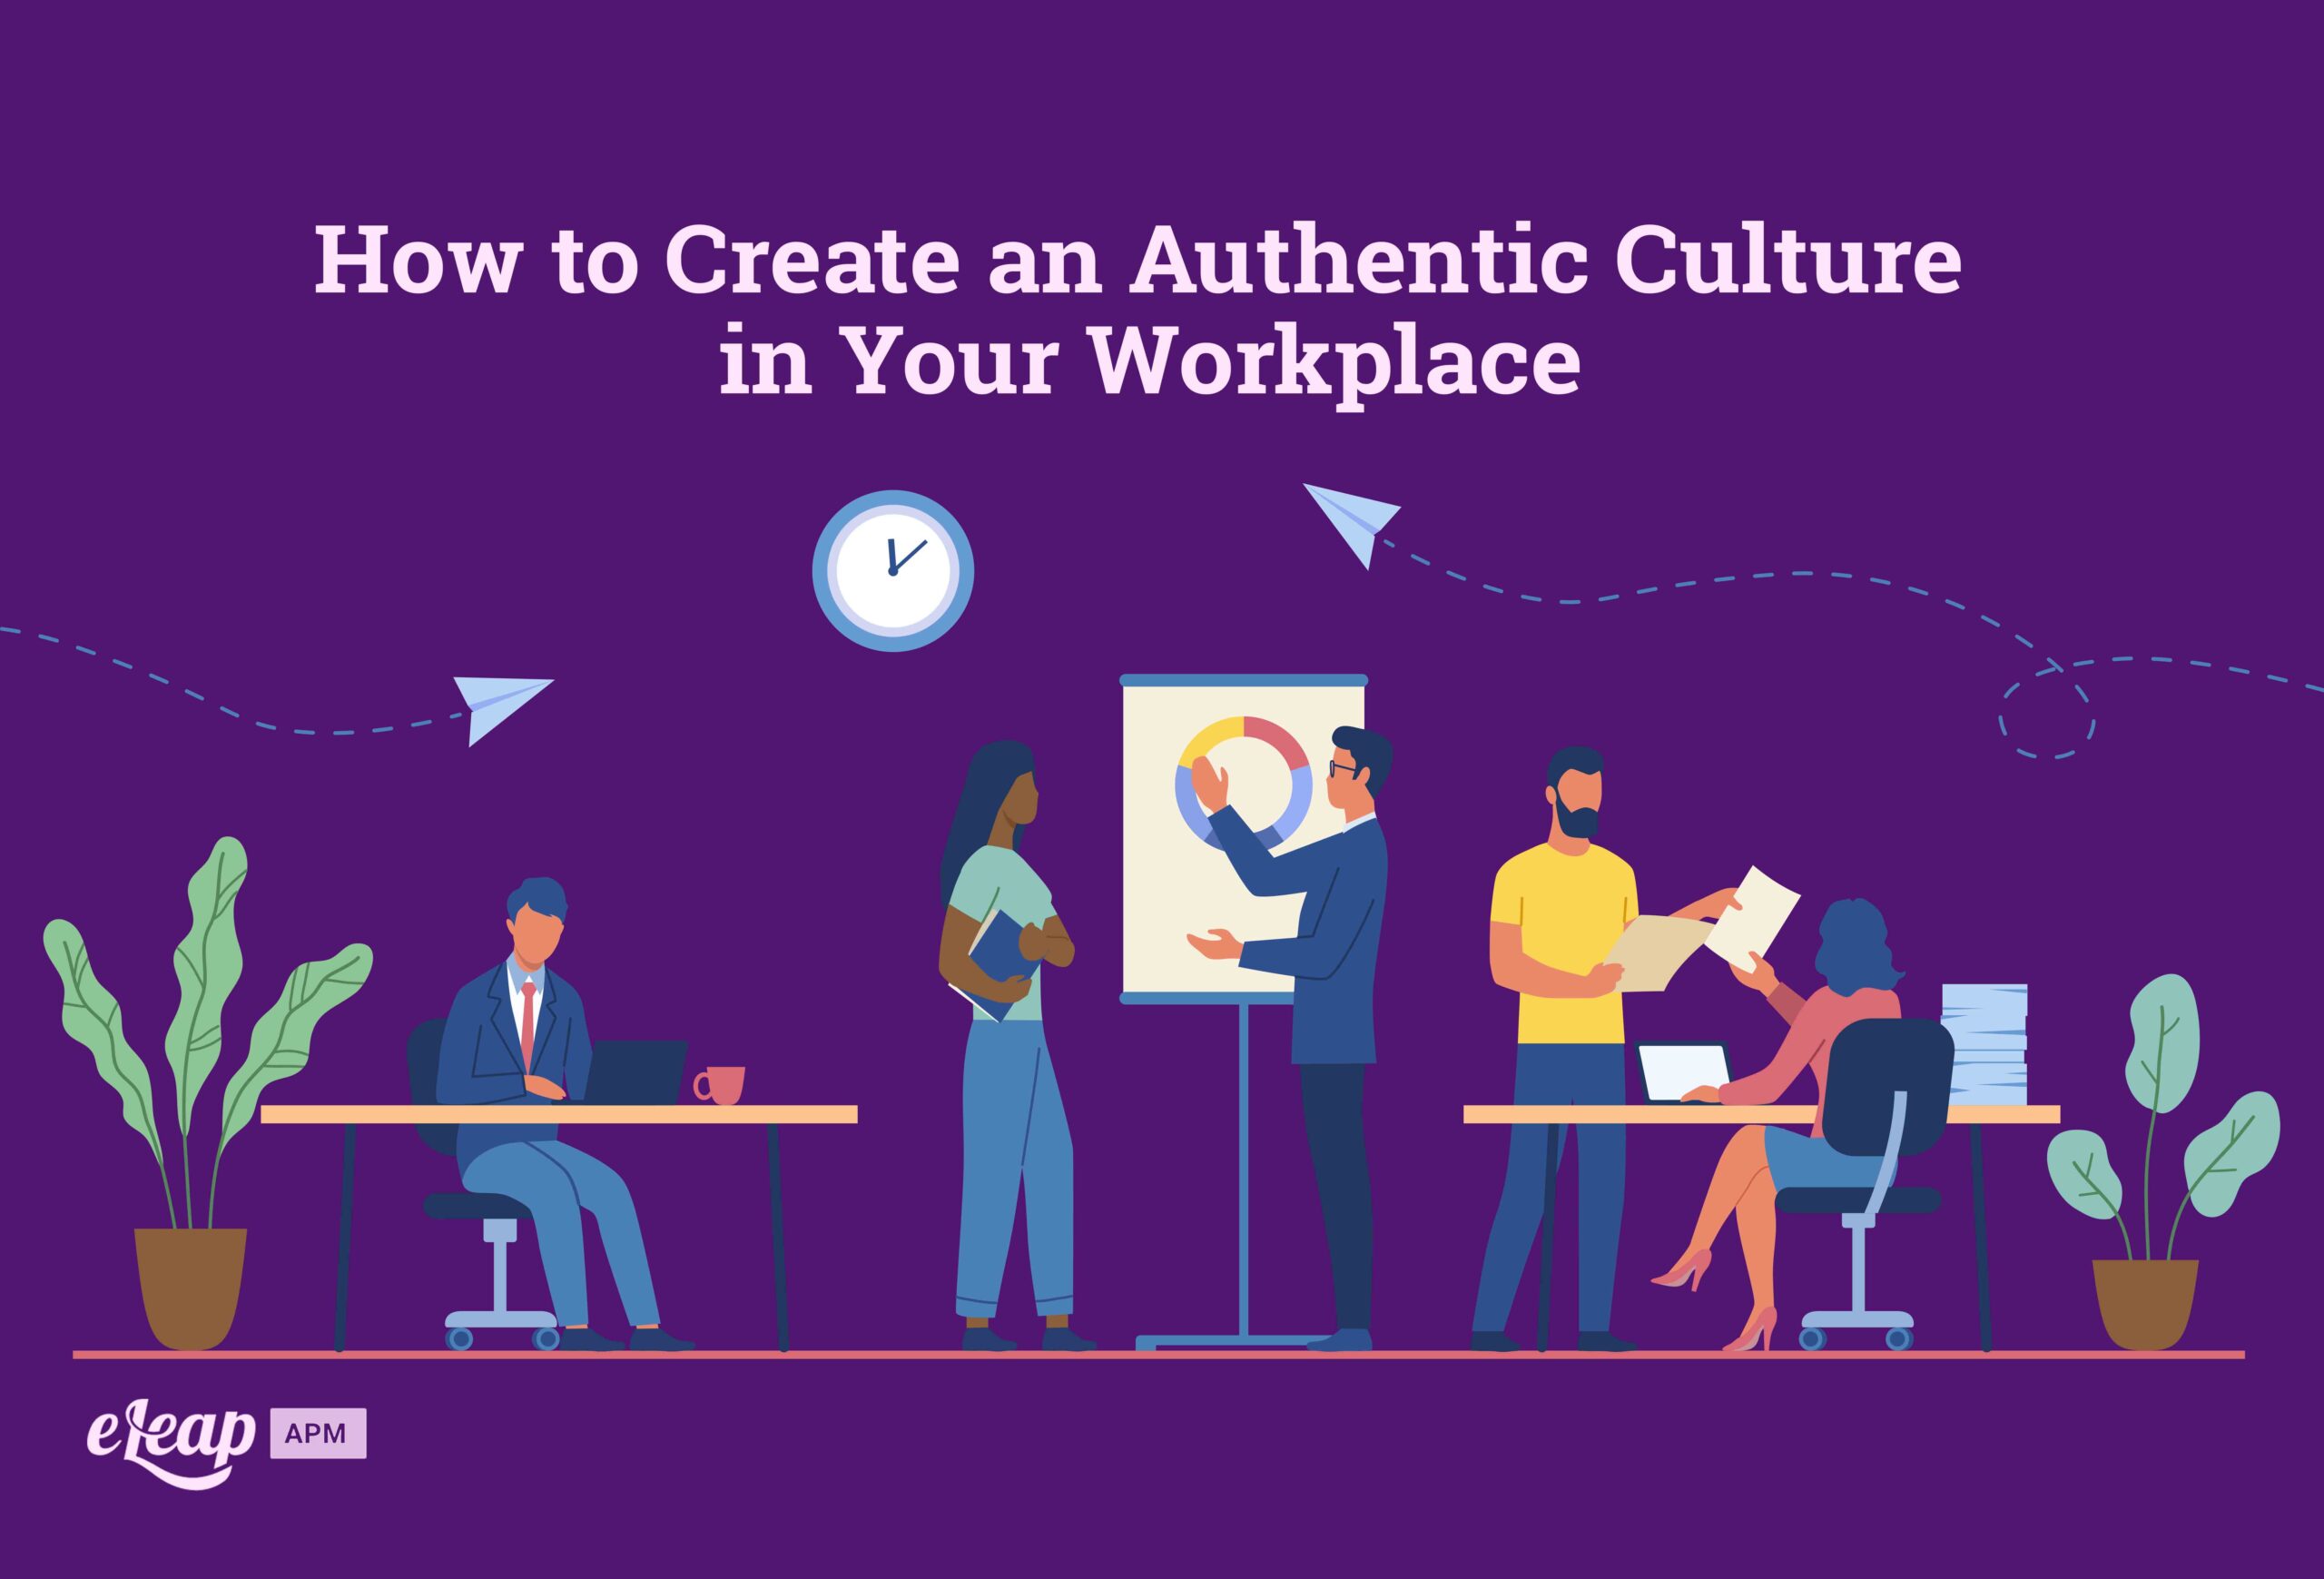 How to Create an Authentic Culture in Your Workplace